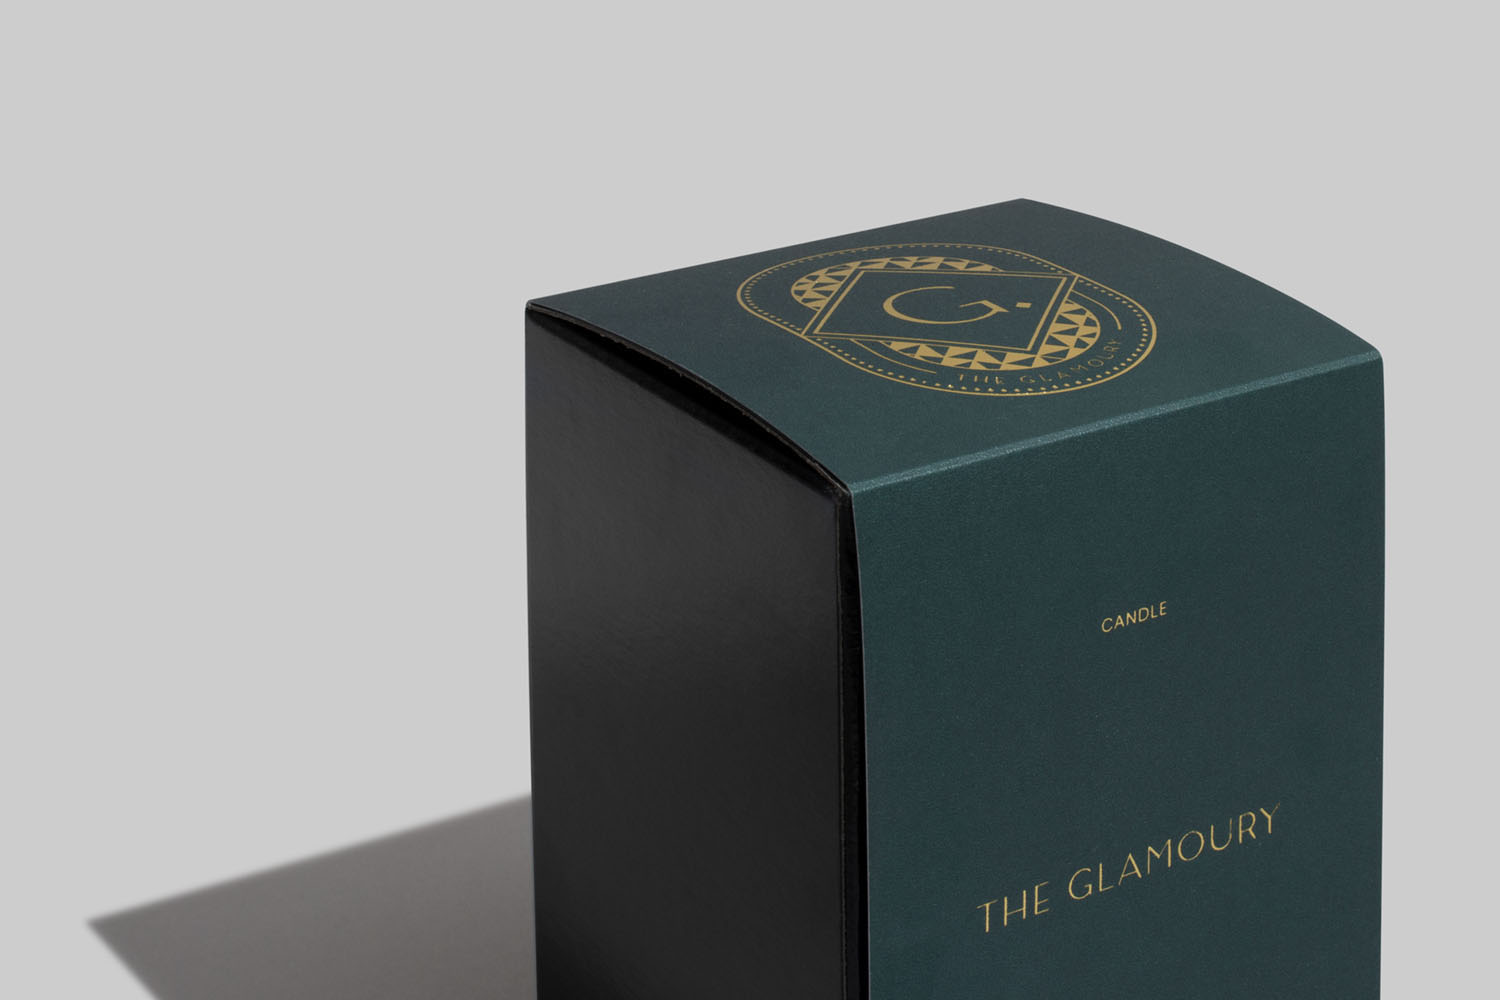 Brand identity and packaging by Canadian graphic design studio Glasfurd & Walker for Vancouver-based luxury make-up and styling salon The Glamoury.